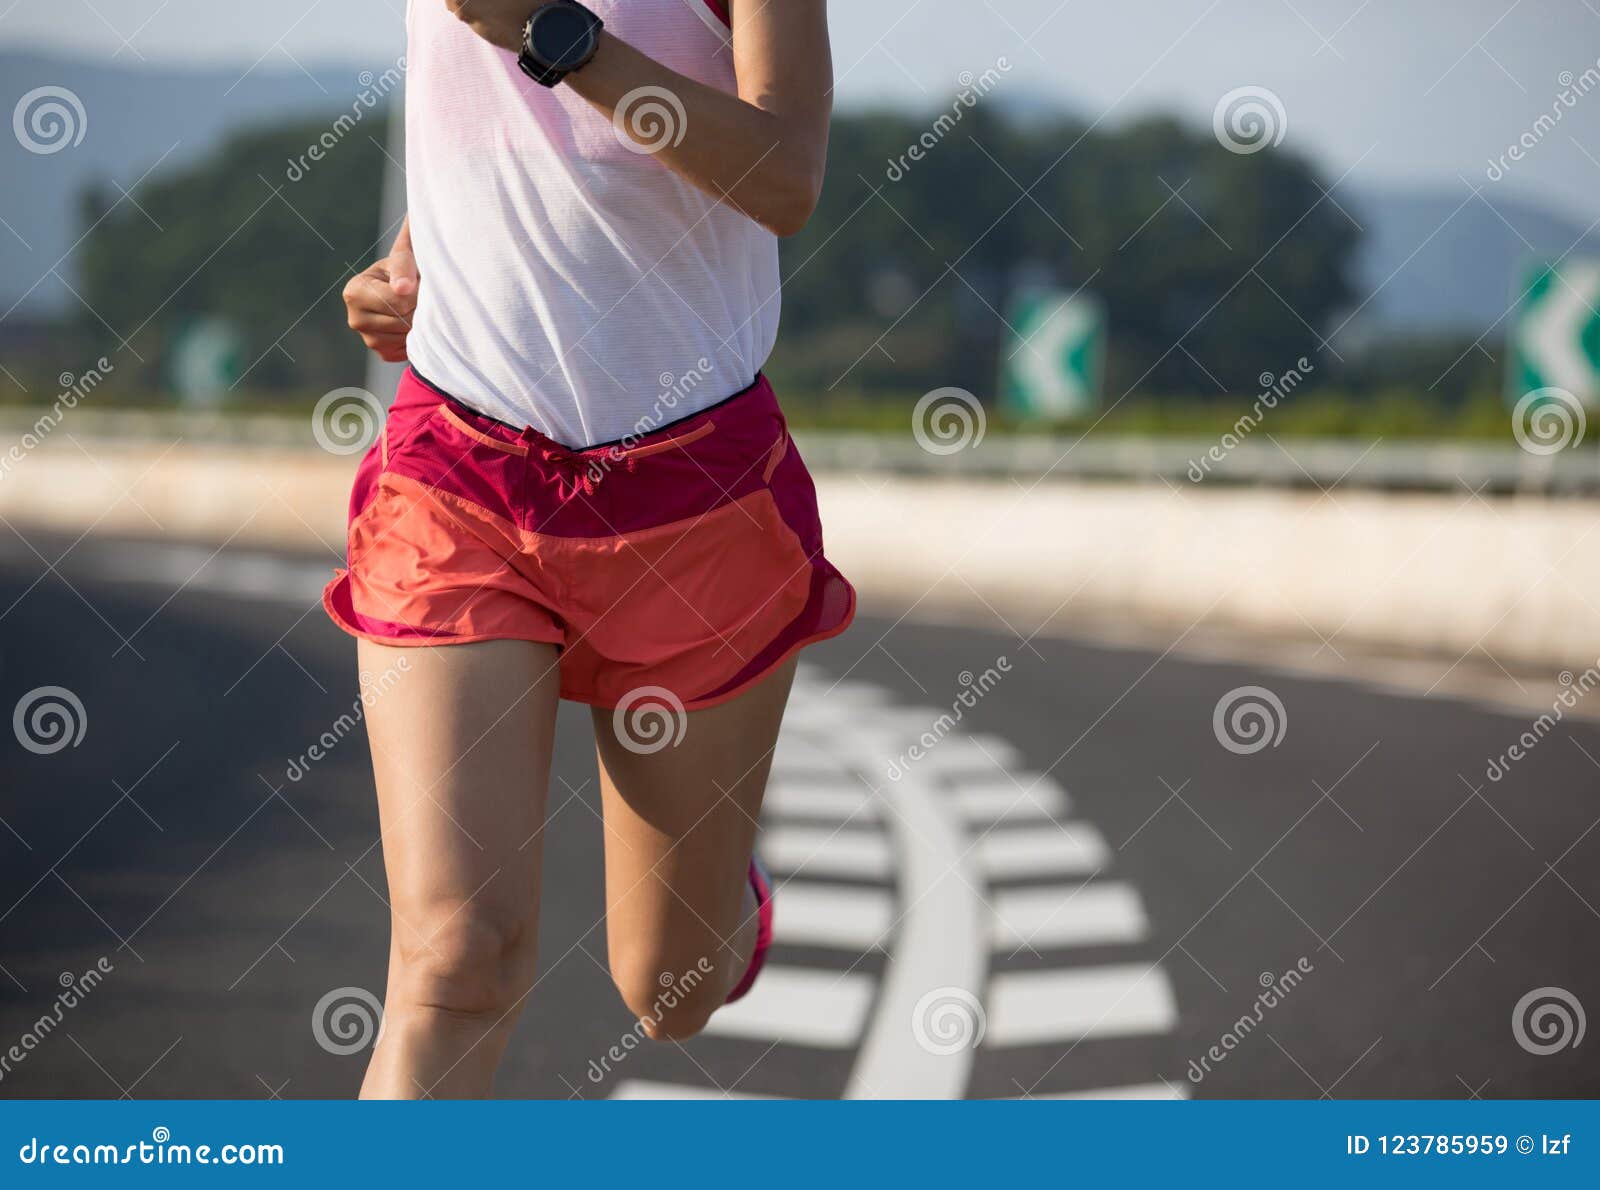 Fitness Woman Running on Highway Road Stock Image - Image of active ...